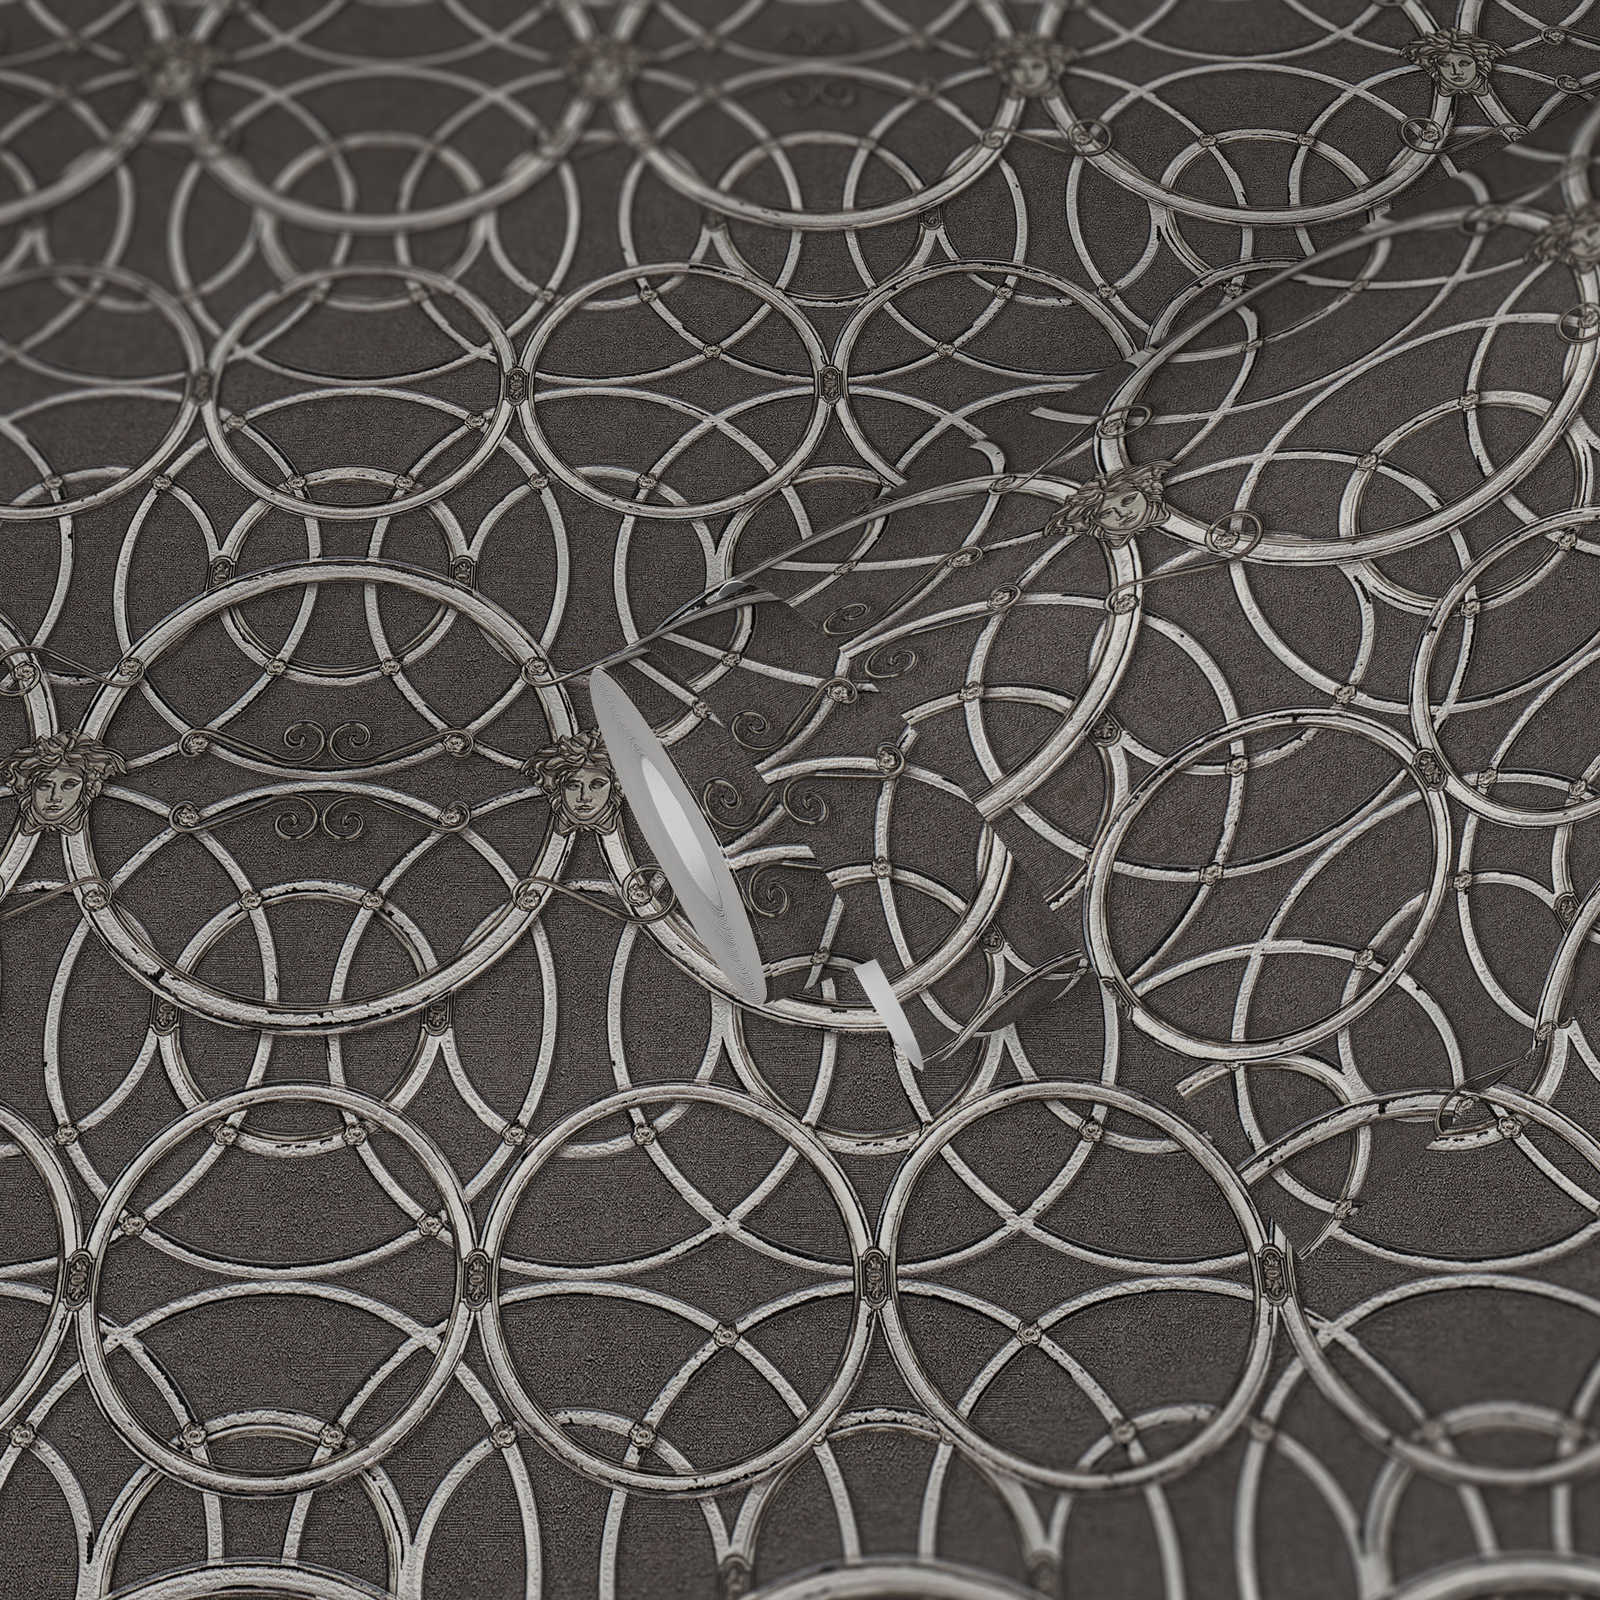             VERSACE Home wallpaper circle pattern and Medusa - silver, grey
        